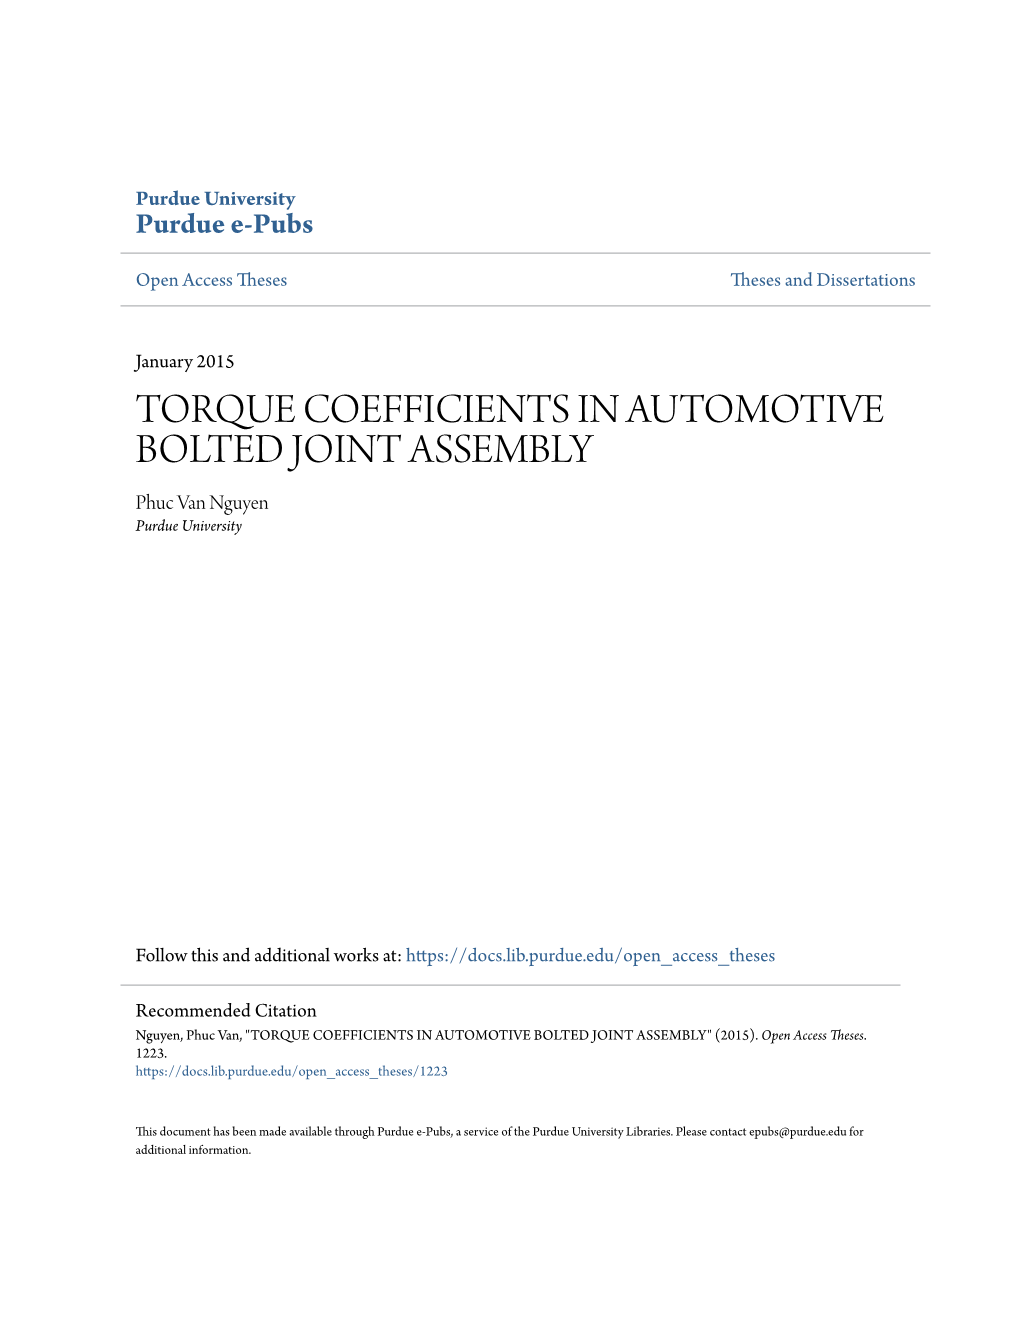 TORQUE COEFFICIENTS in AUTOMOTIVE BOLTED JOINT ASSEMBLY Phuc Van Nguyen Purdue University